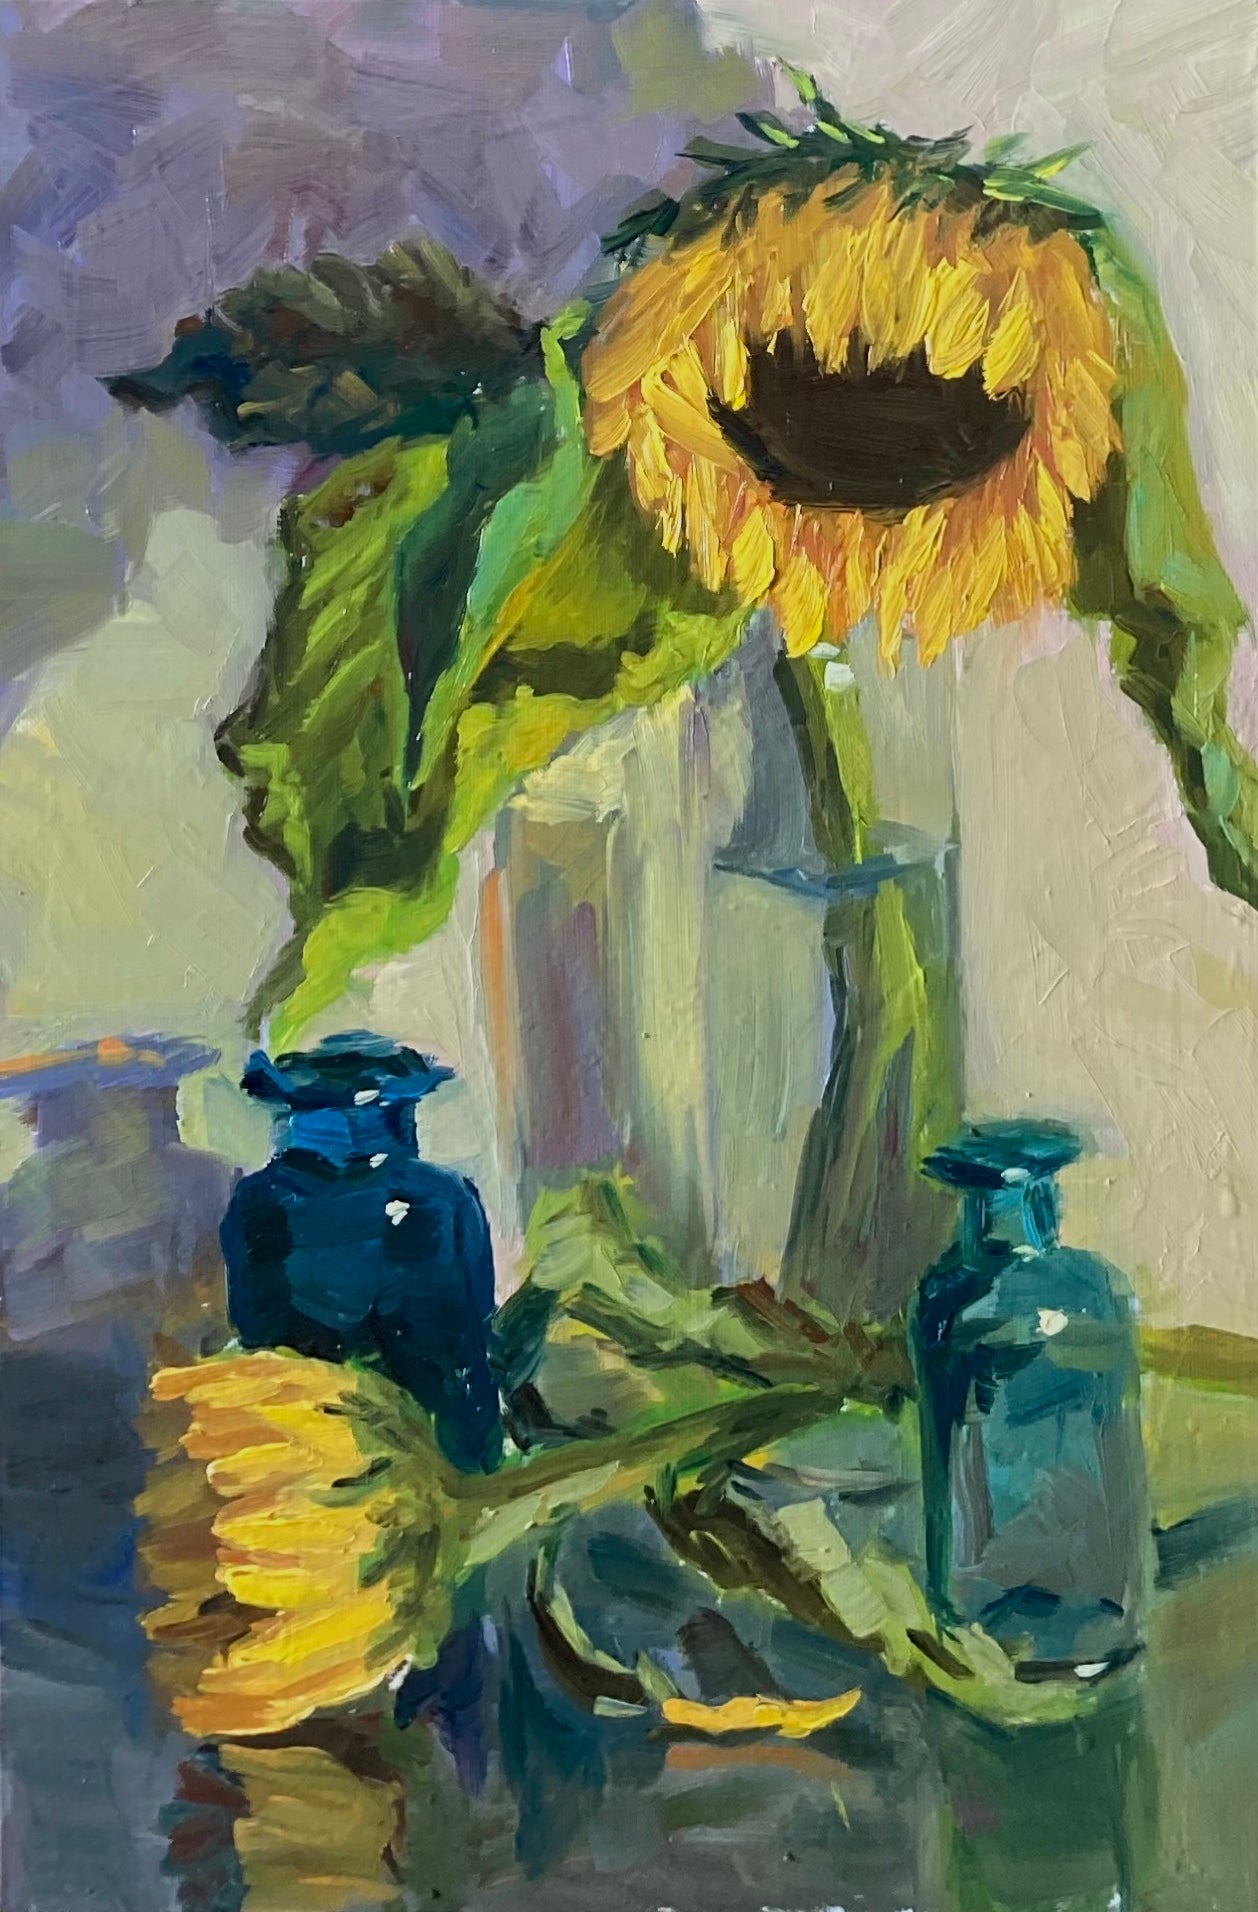 Sunflower Series 21 - Original Stilllife Painting, 8 by 12 inches